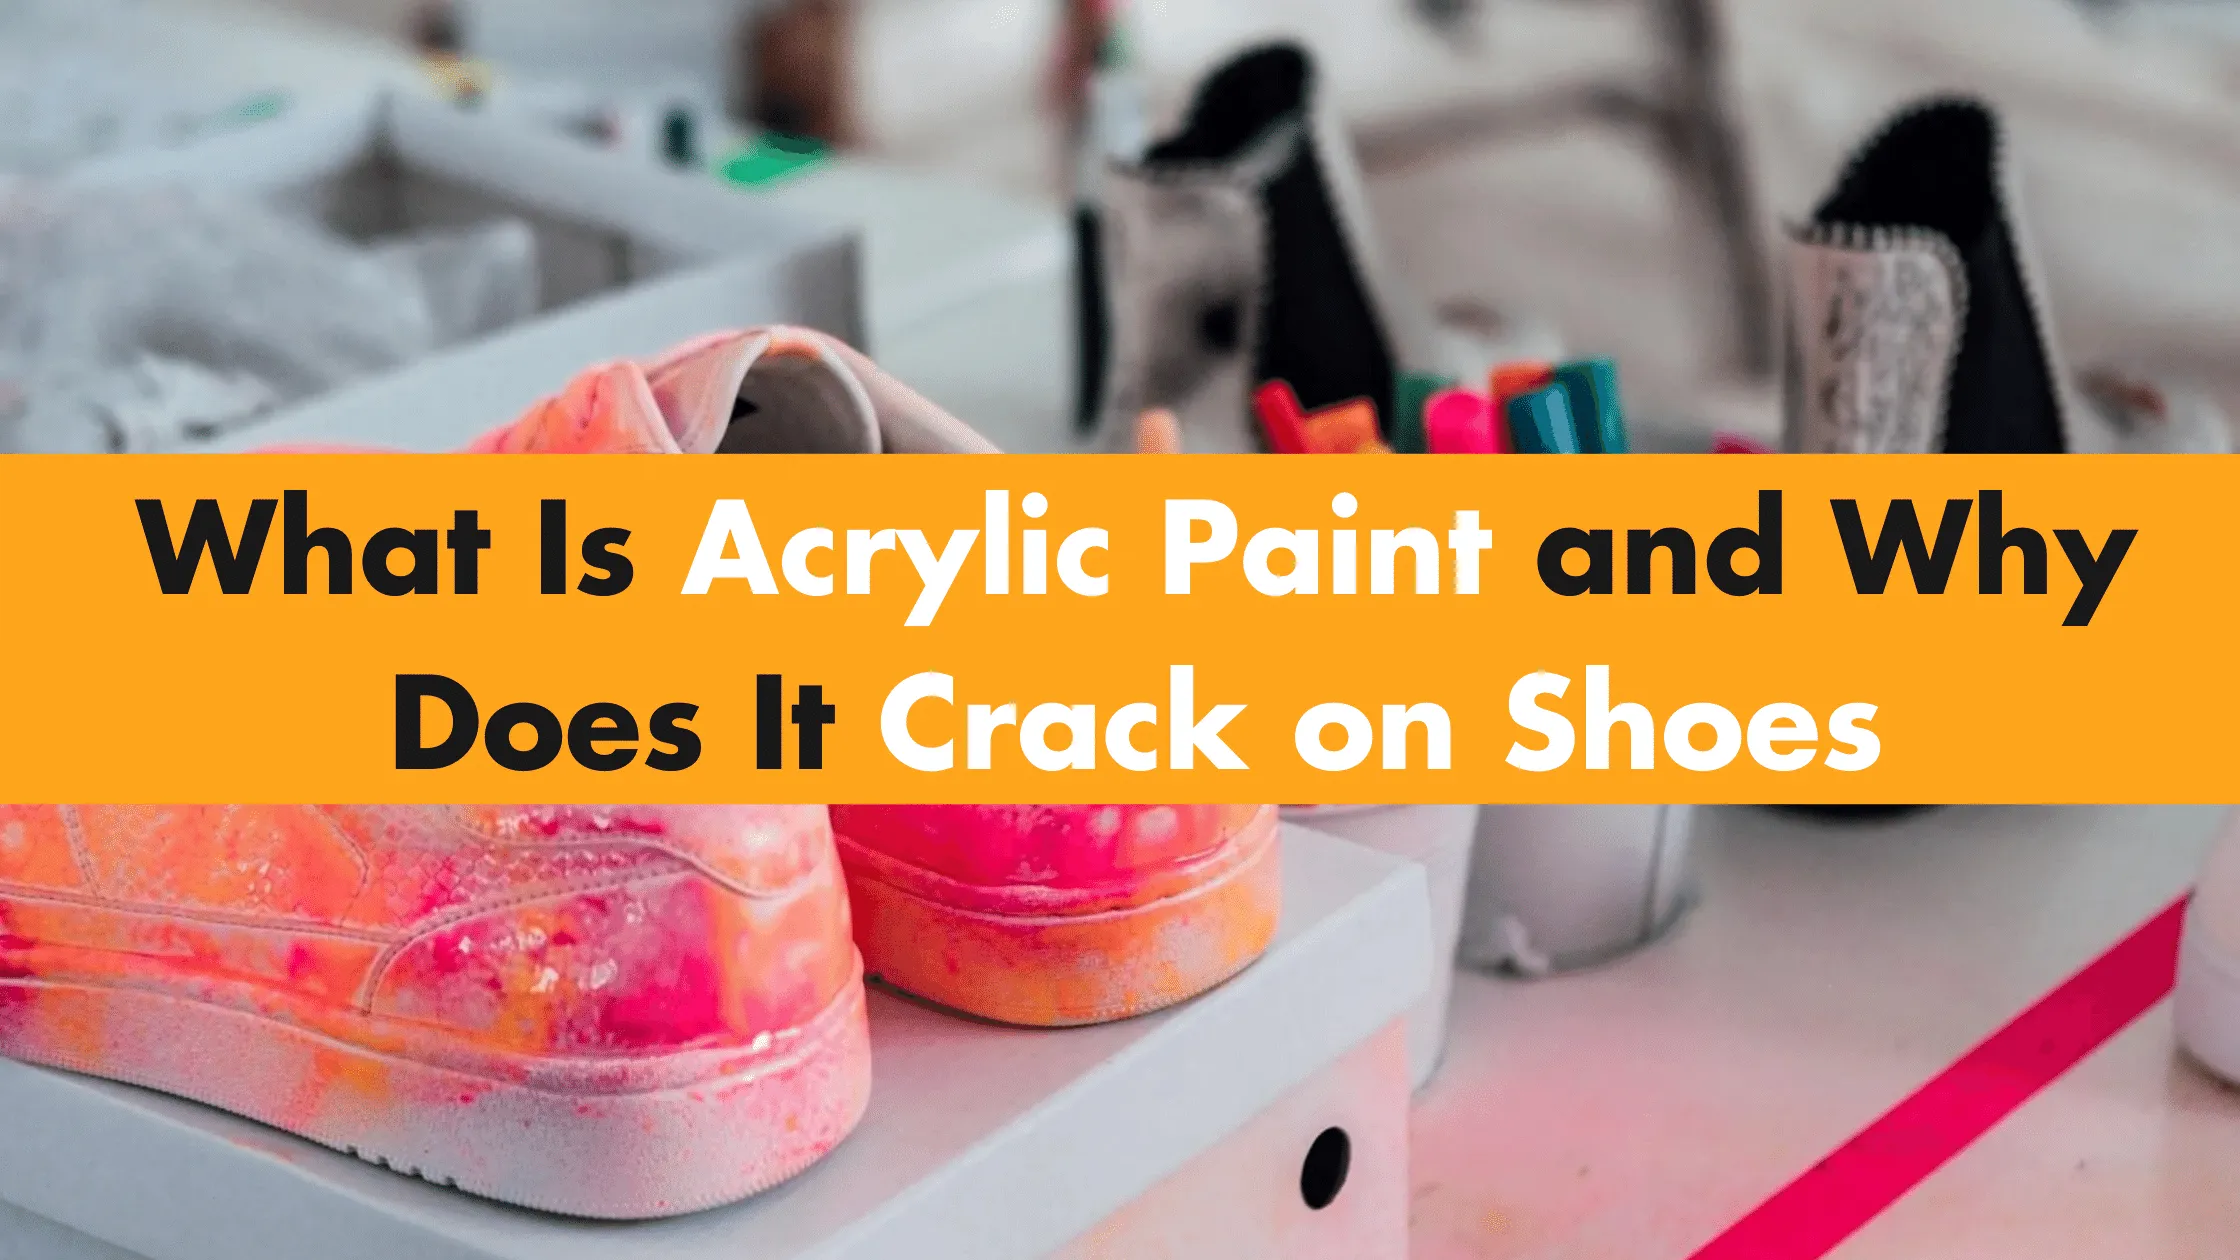 What Is Acrylic Paint and Why Does It Crack on Shoes